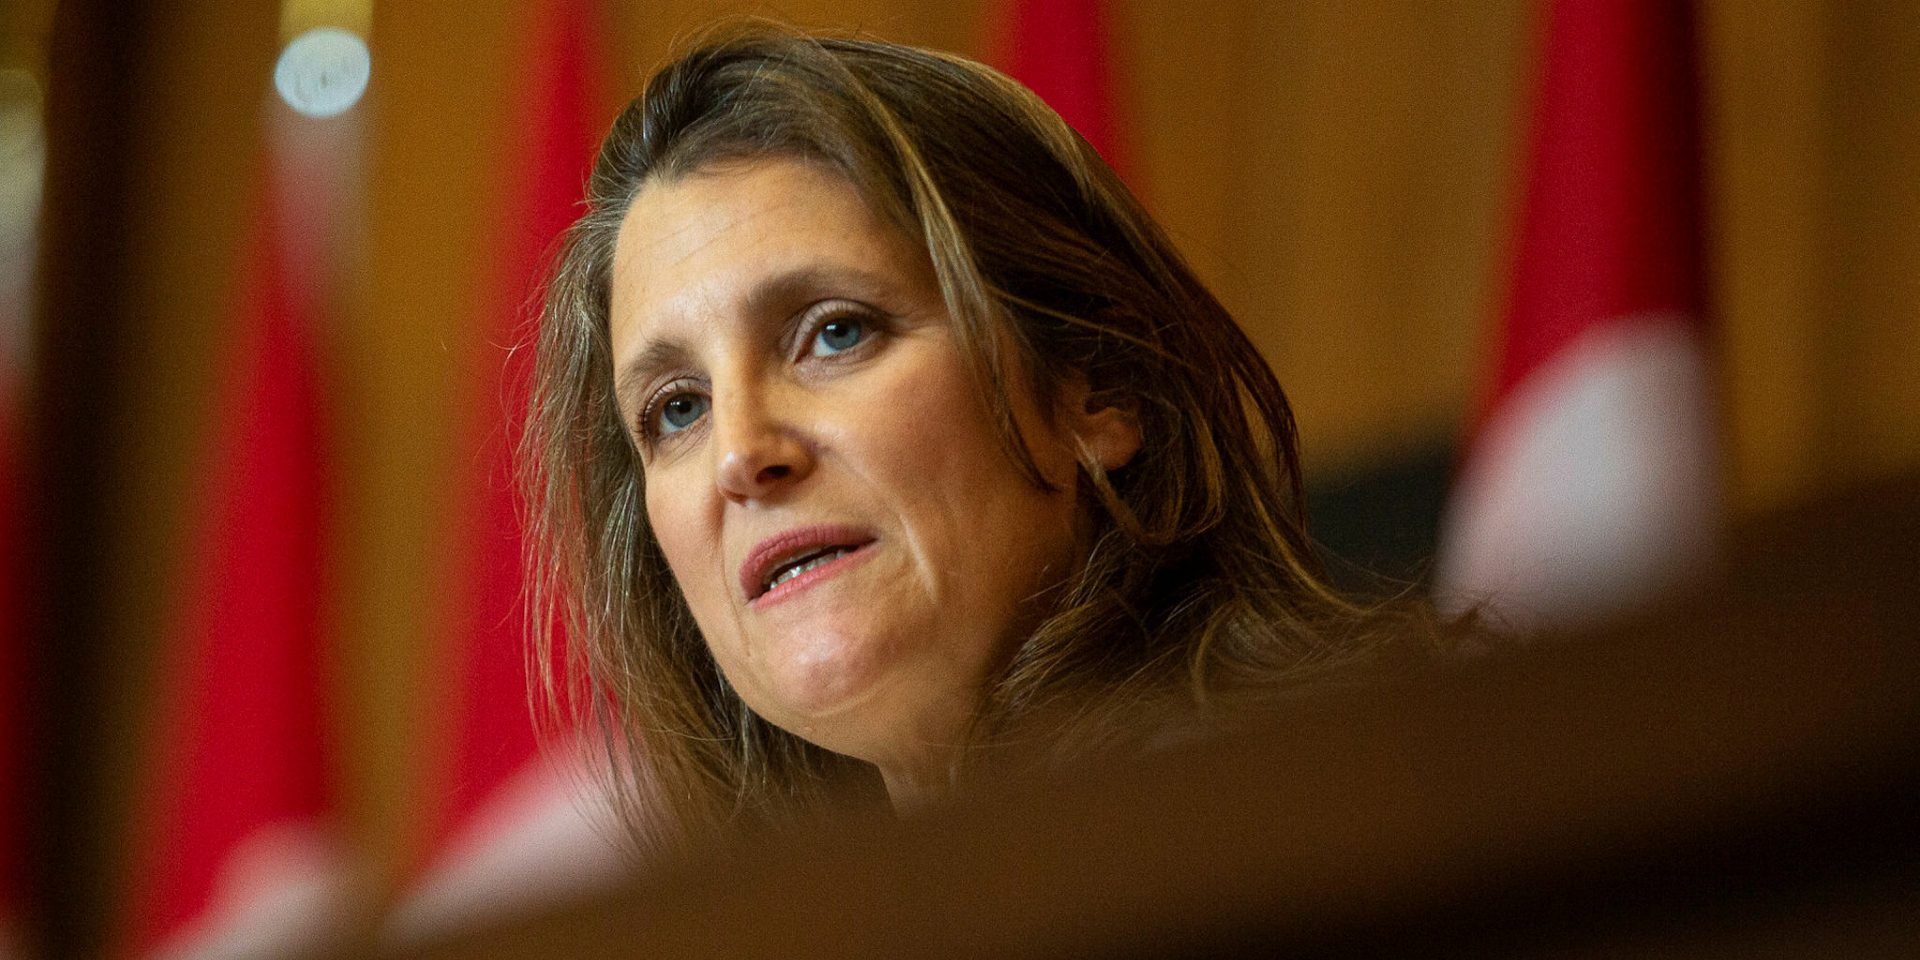 Deputy Prime Minister Chrystia Freeland holds a press conference  at the Sir John A. Macdonald building in Ottawa on  Nov. 3, 2022, before the Fall Economic Statement is tabled in the House of Commons. Andrew Meade